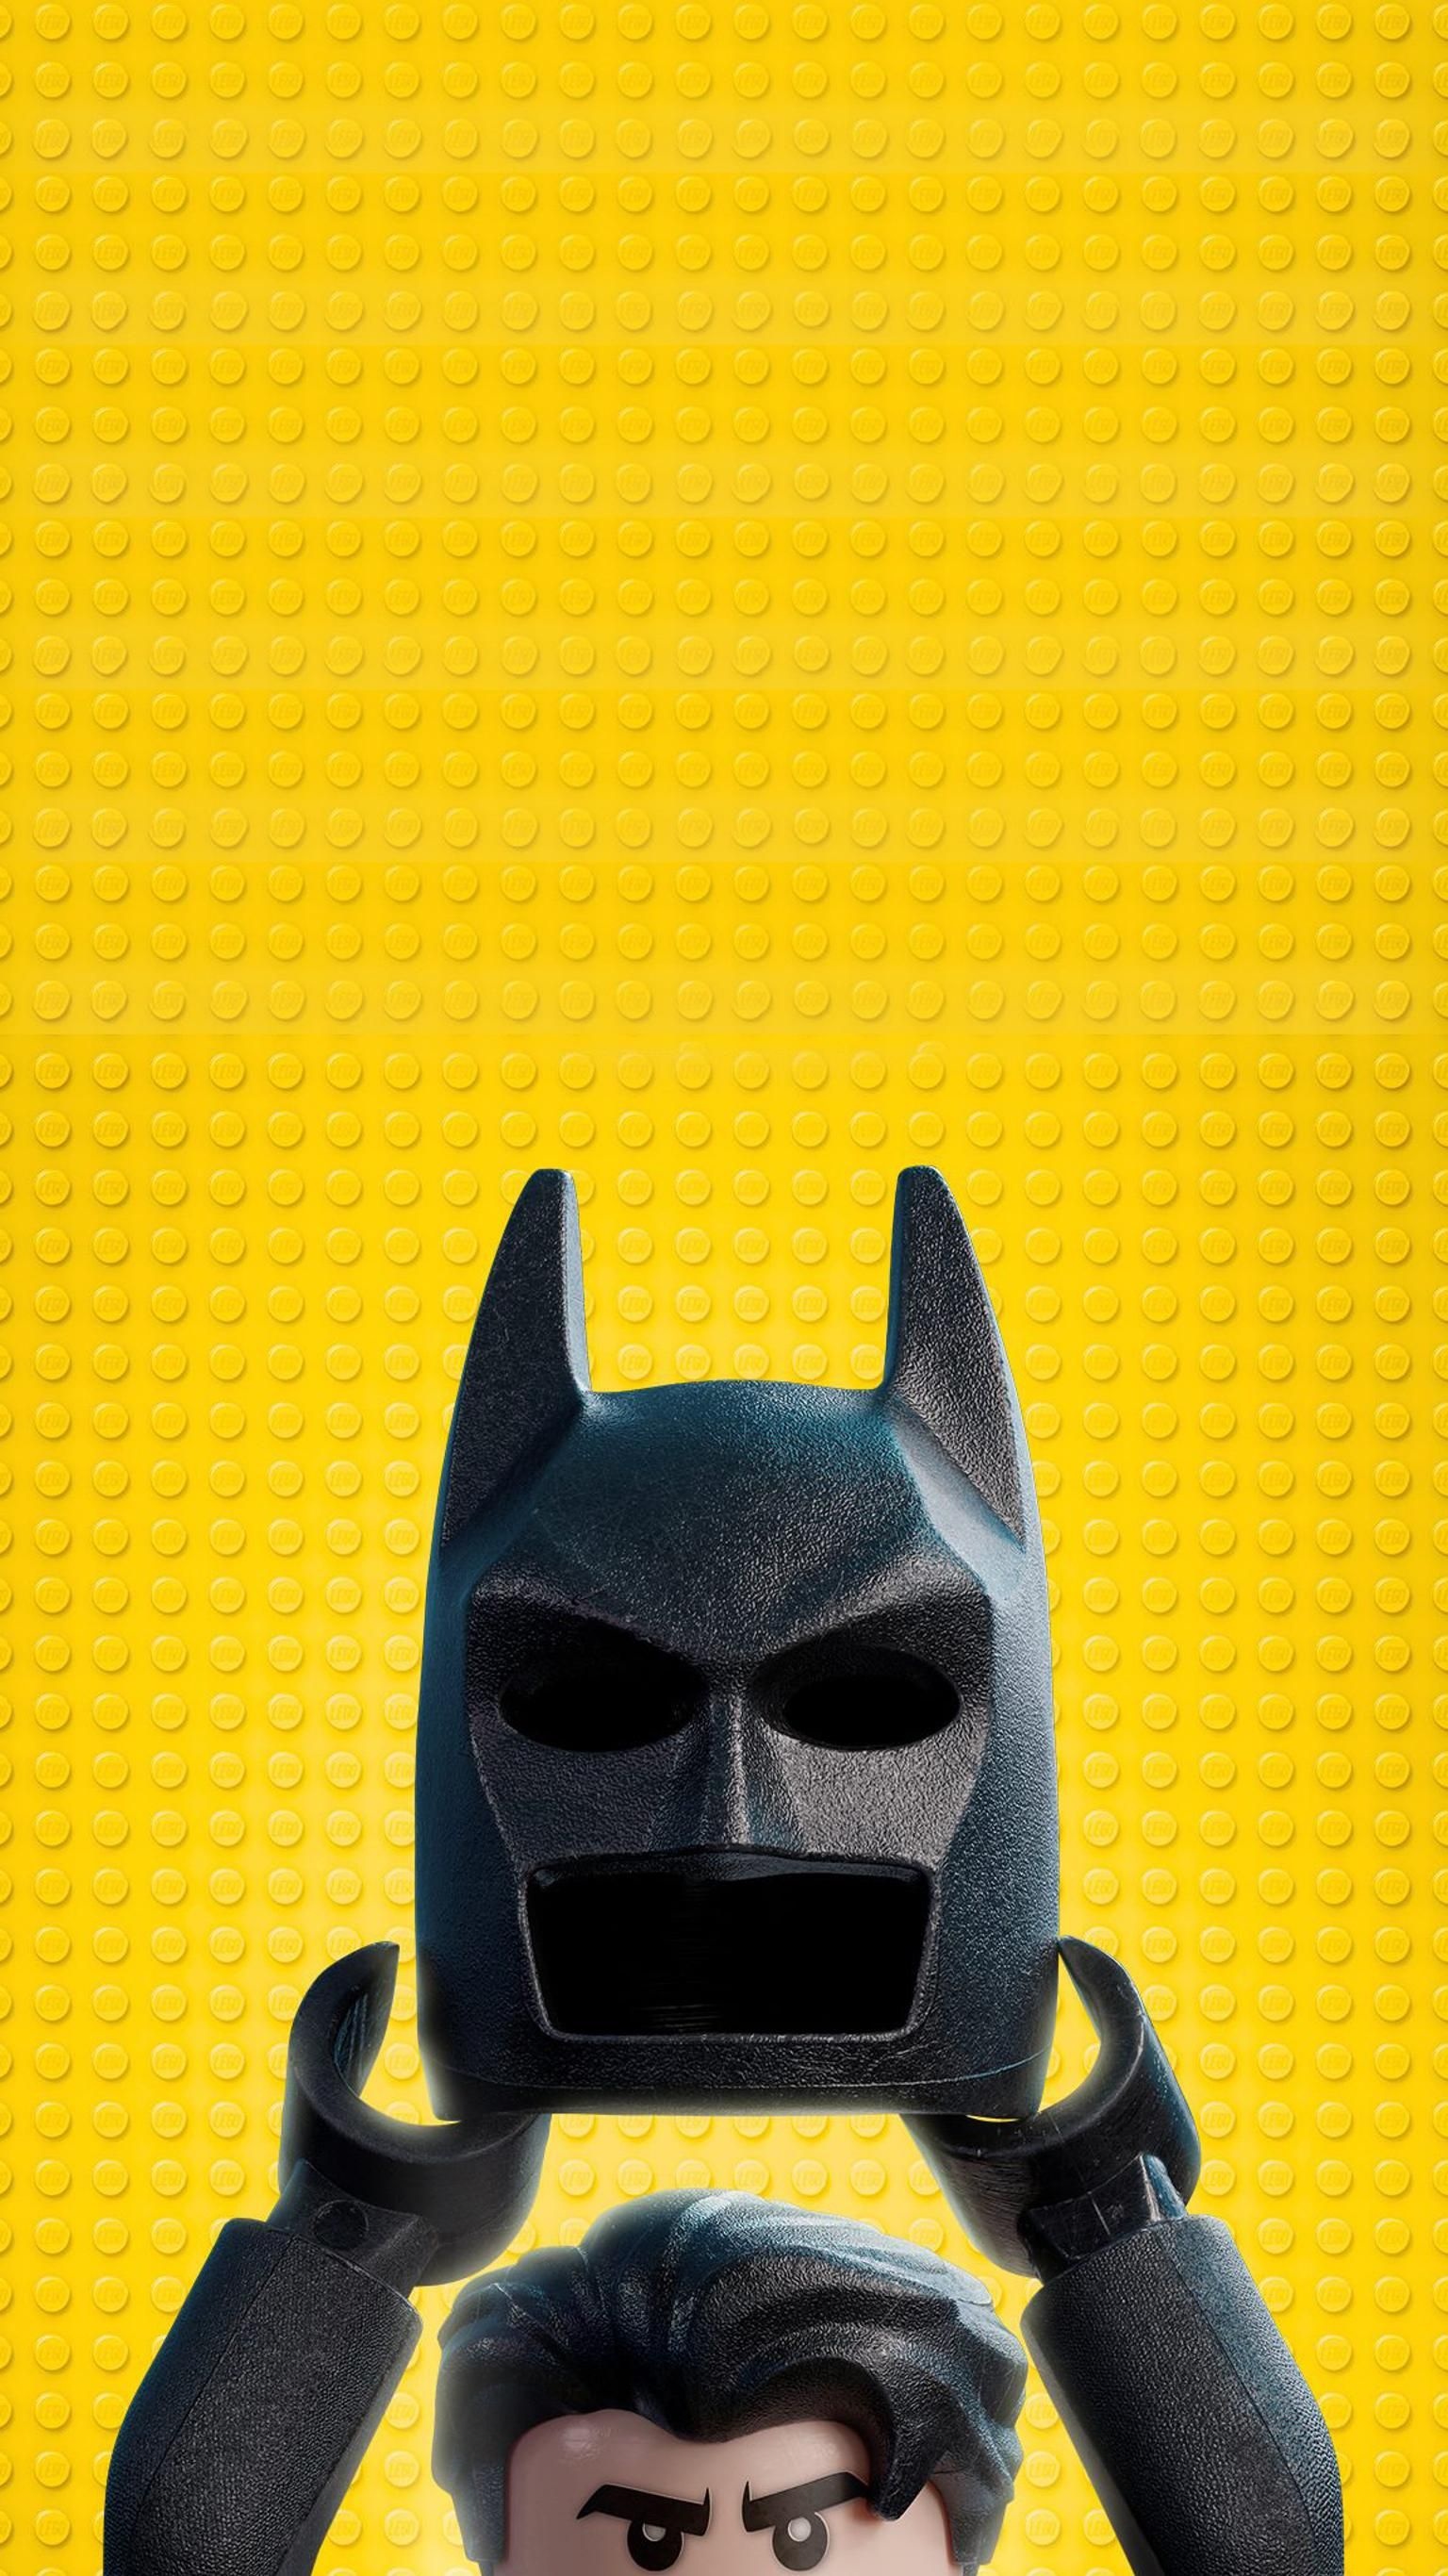 Lego Batman Movie phone wallpaper, HD quality, MovieMania, Perfect for mobile devices, 1540x2740 HD Phone